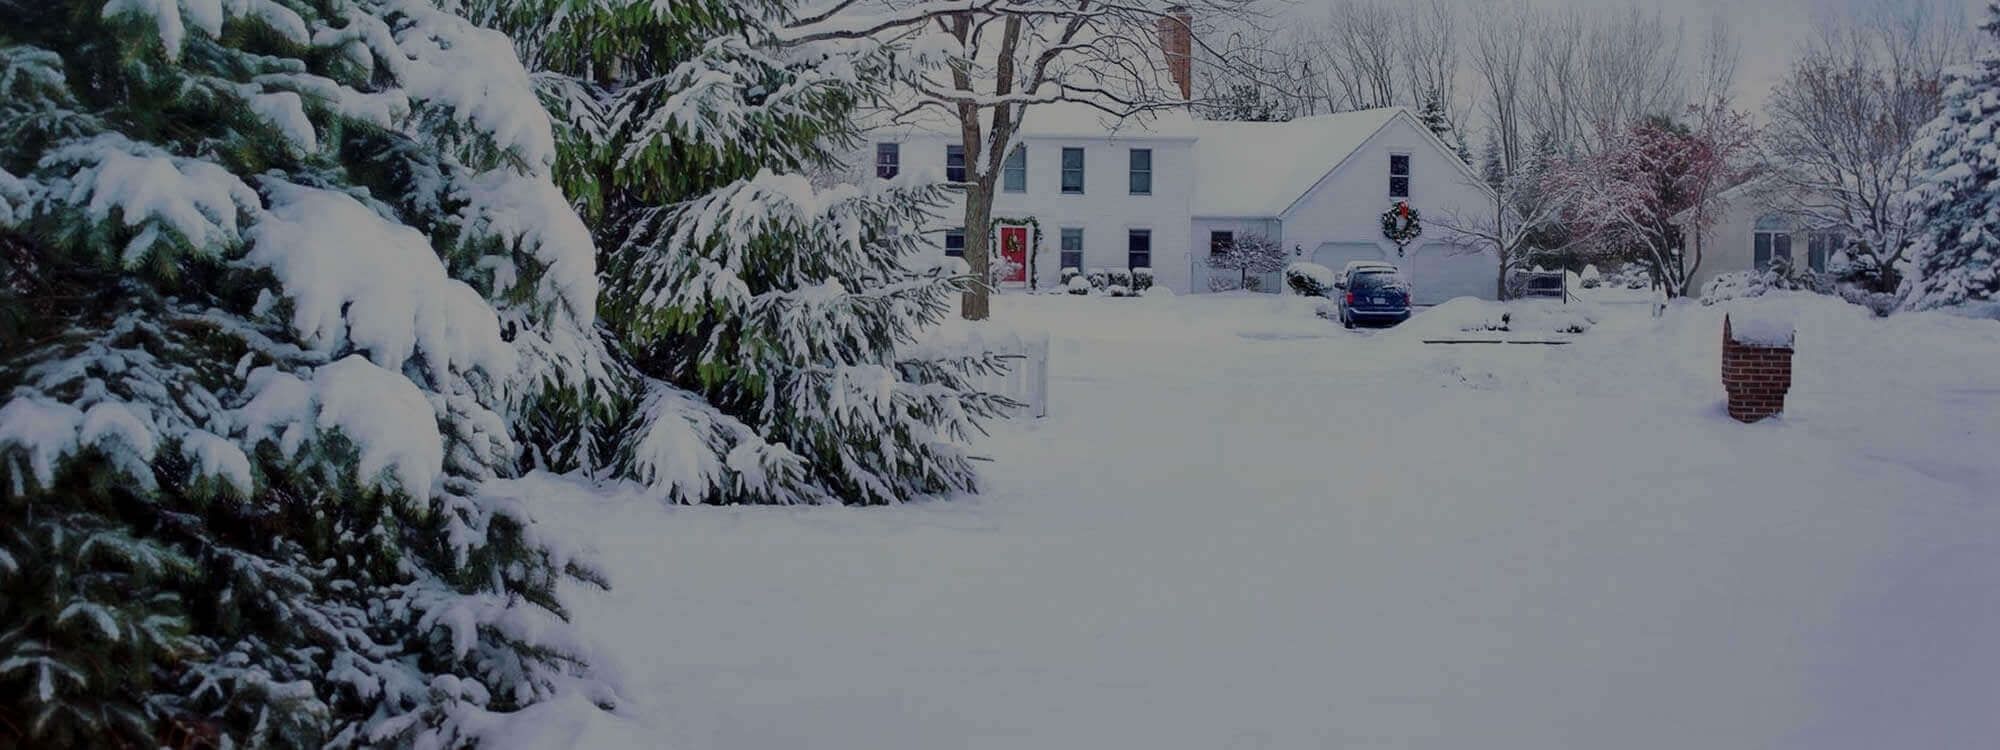 Snow Removal Service In Madison Wi Area, Madison Landscape And Snow Removal